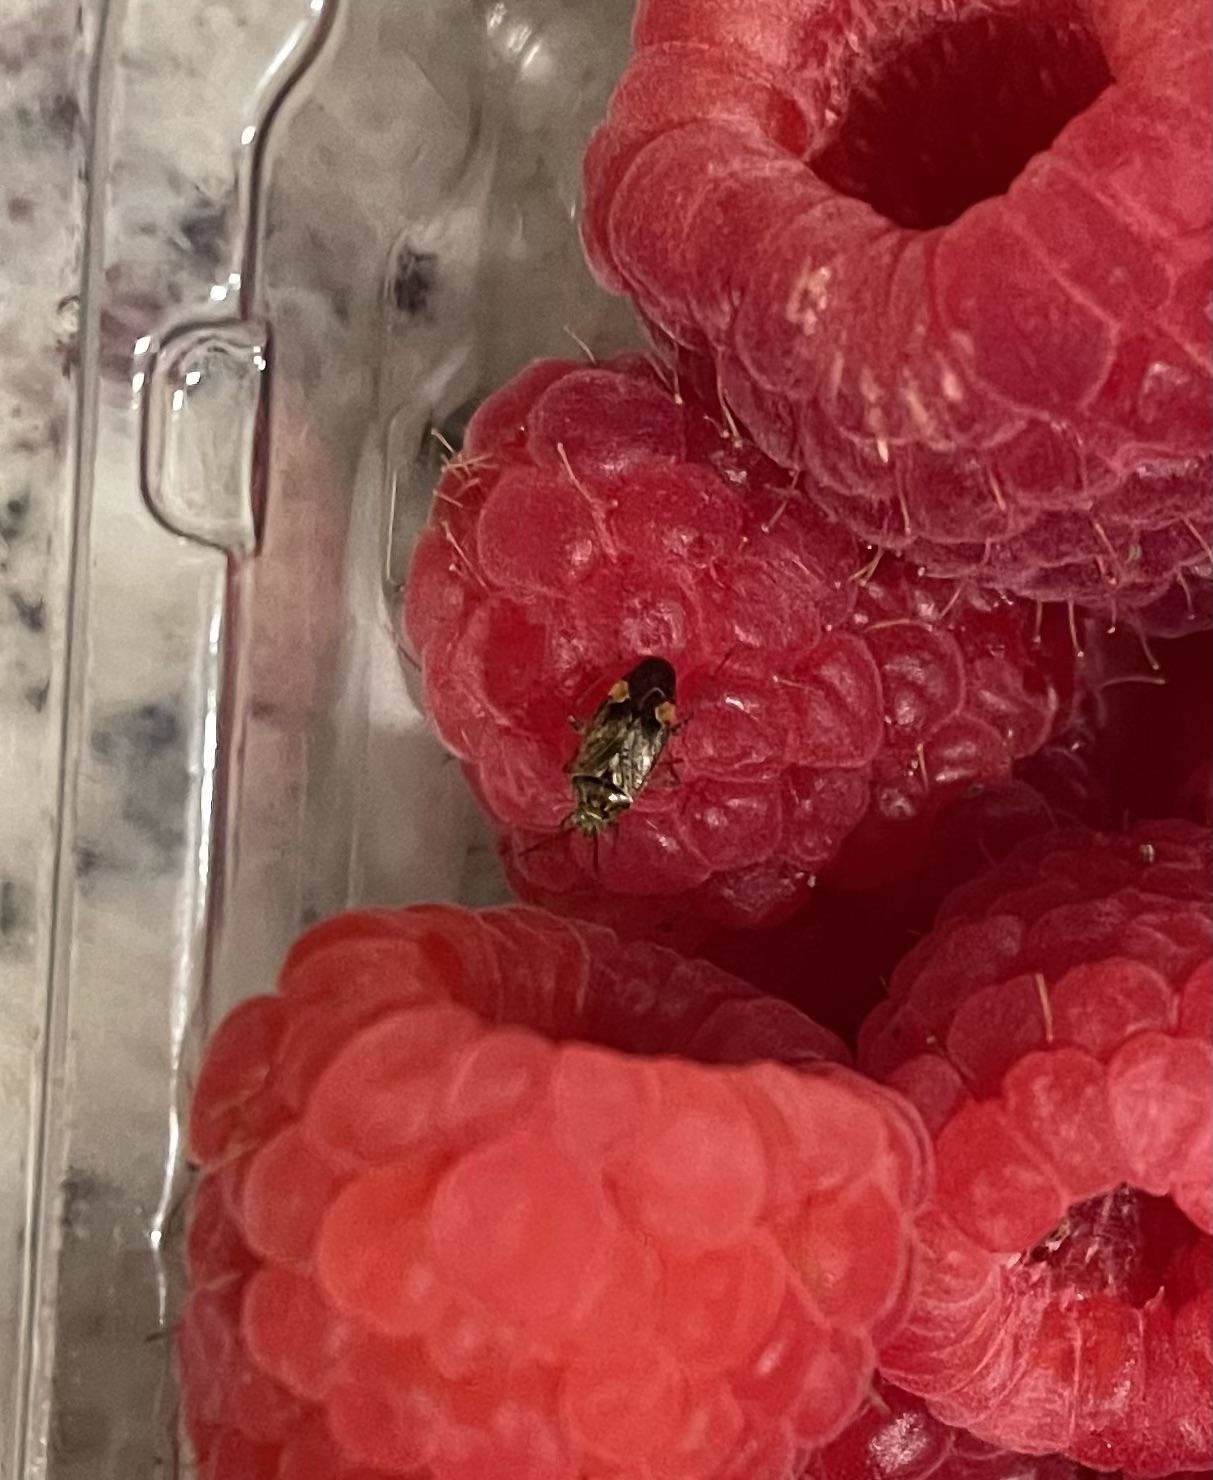 A fly sitting inside one of the multiple raspberries in a clear plastic container